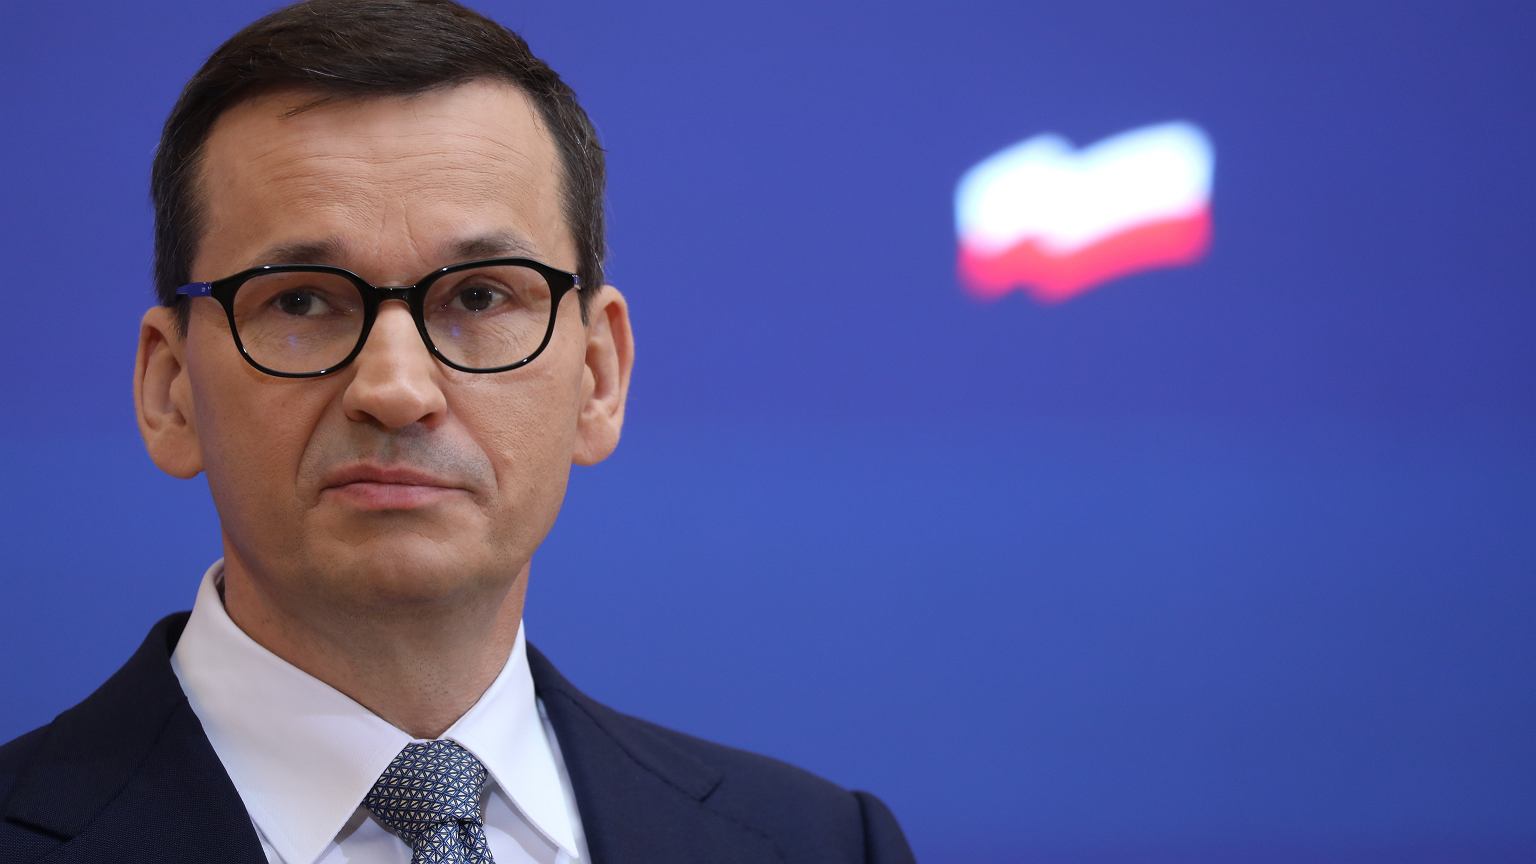 Self-maker under the magnifying glass of the Bureau of Competition and Consumer Protection.  Mateusz Morawiecki saw an "economic future" in this company, and UOKiK saw financial pyramiding and consumer misinformation.